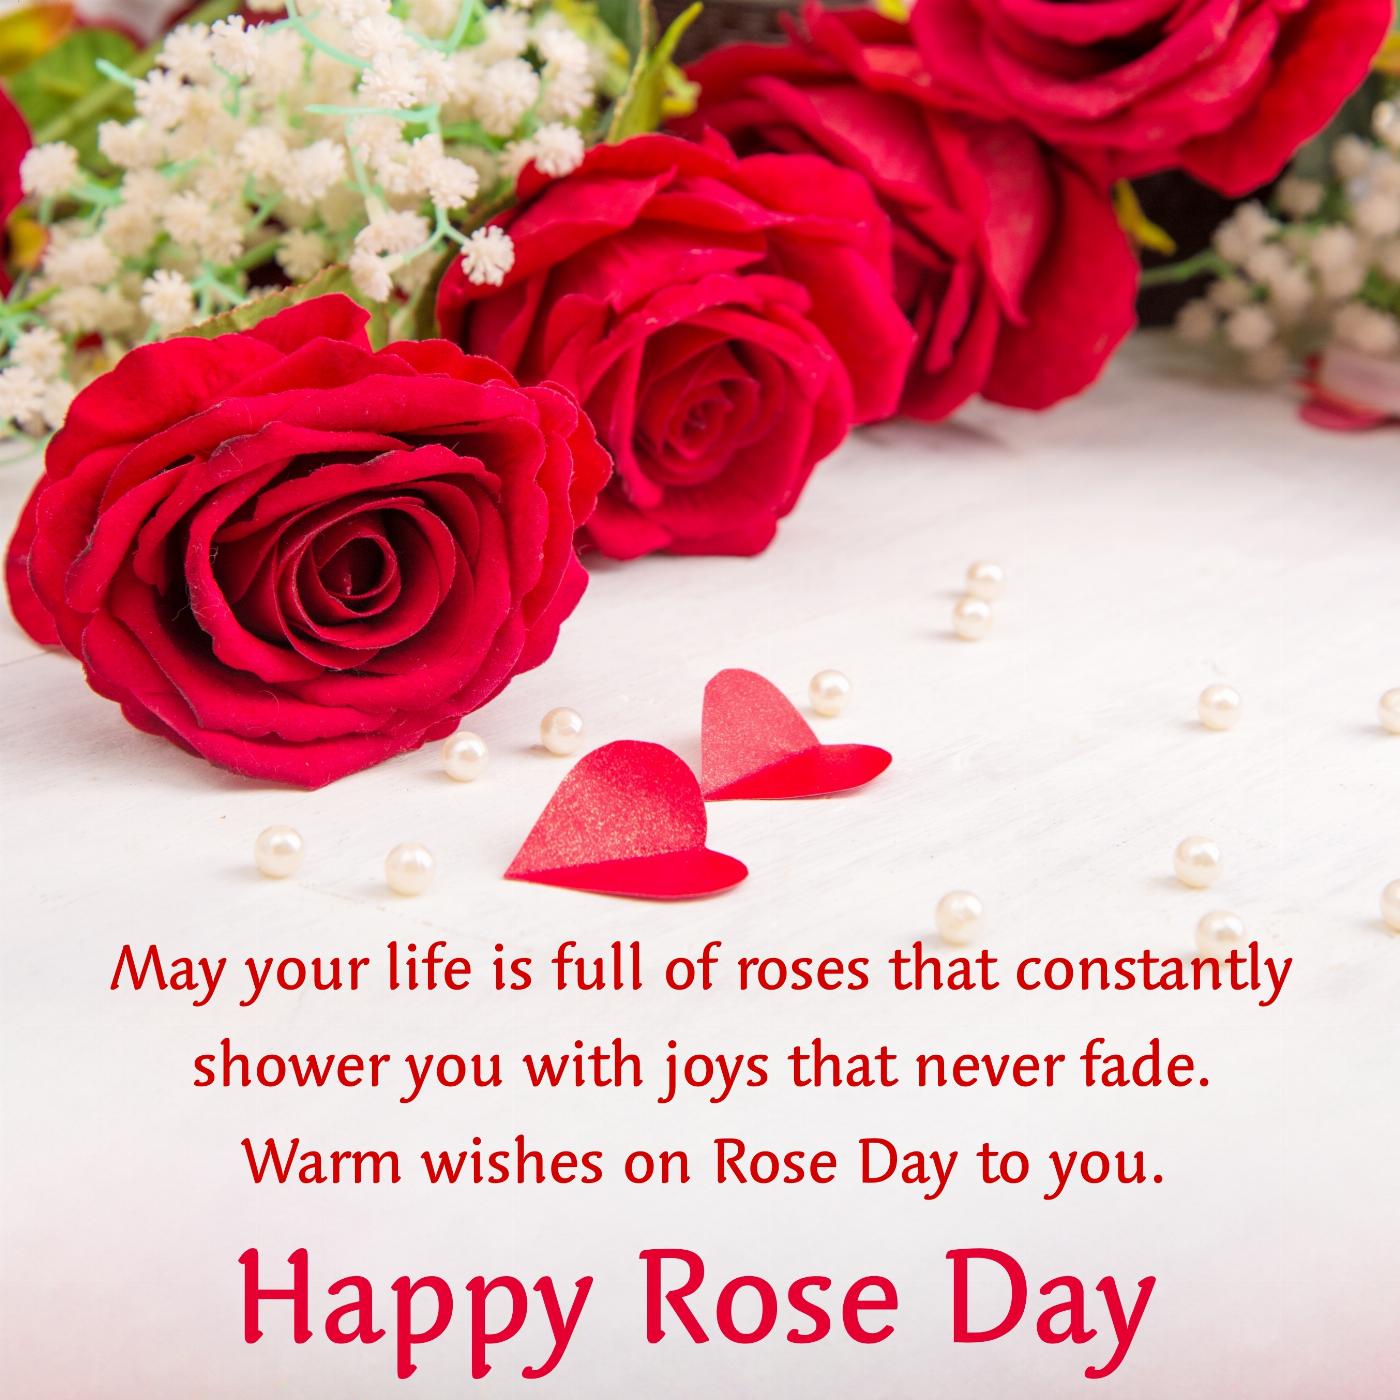 May your life is full of roses that constantly shower you with joys